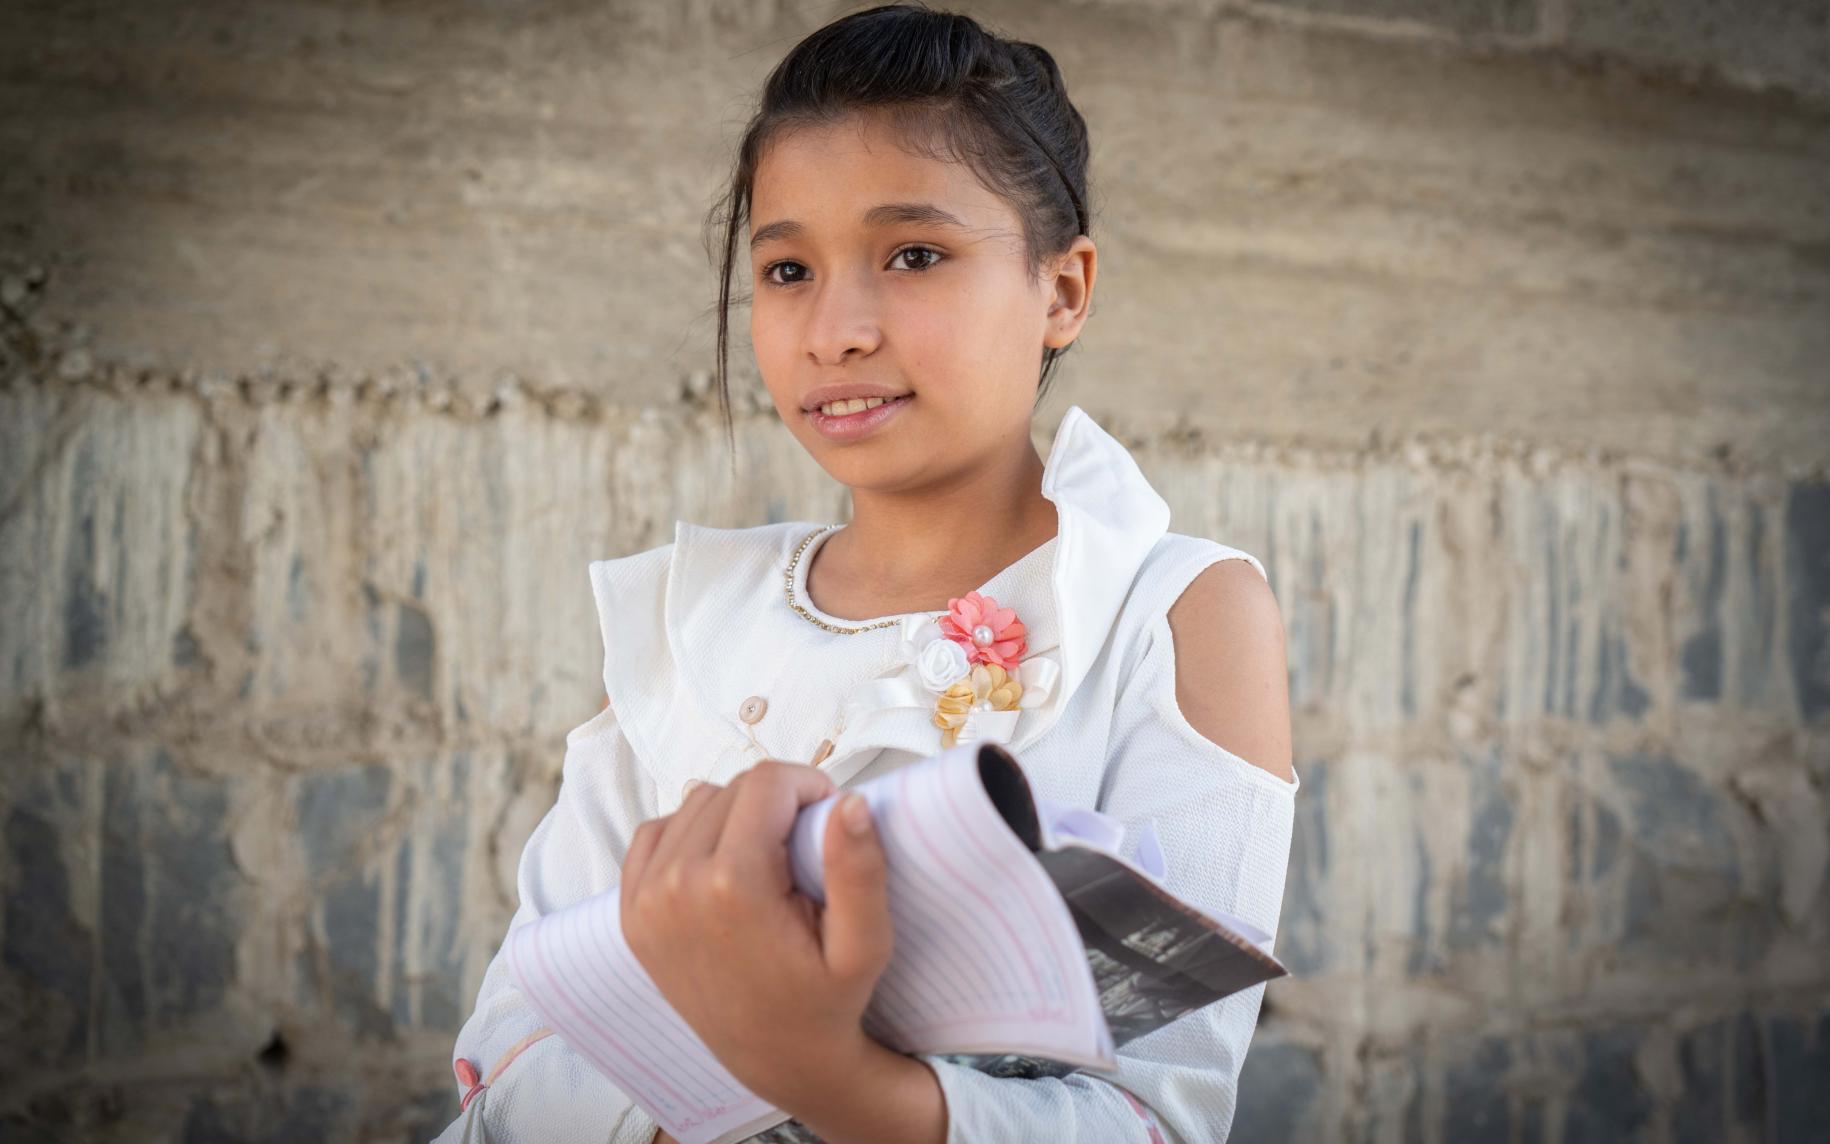 12-year-old Amina looks off the camera as she proudly holds her notebook.